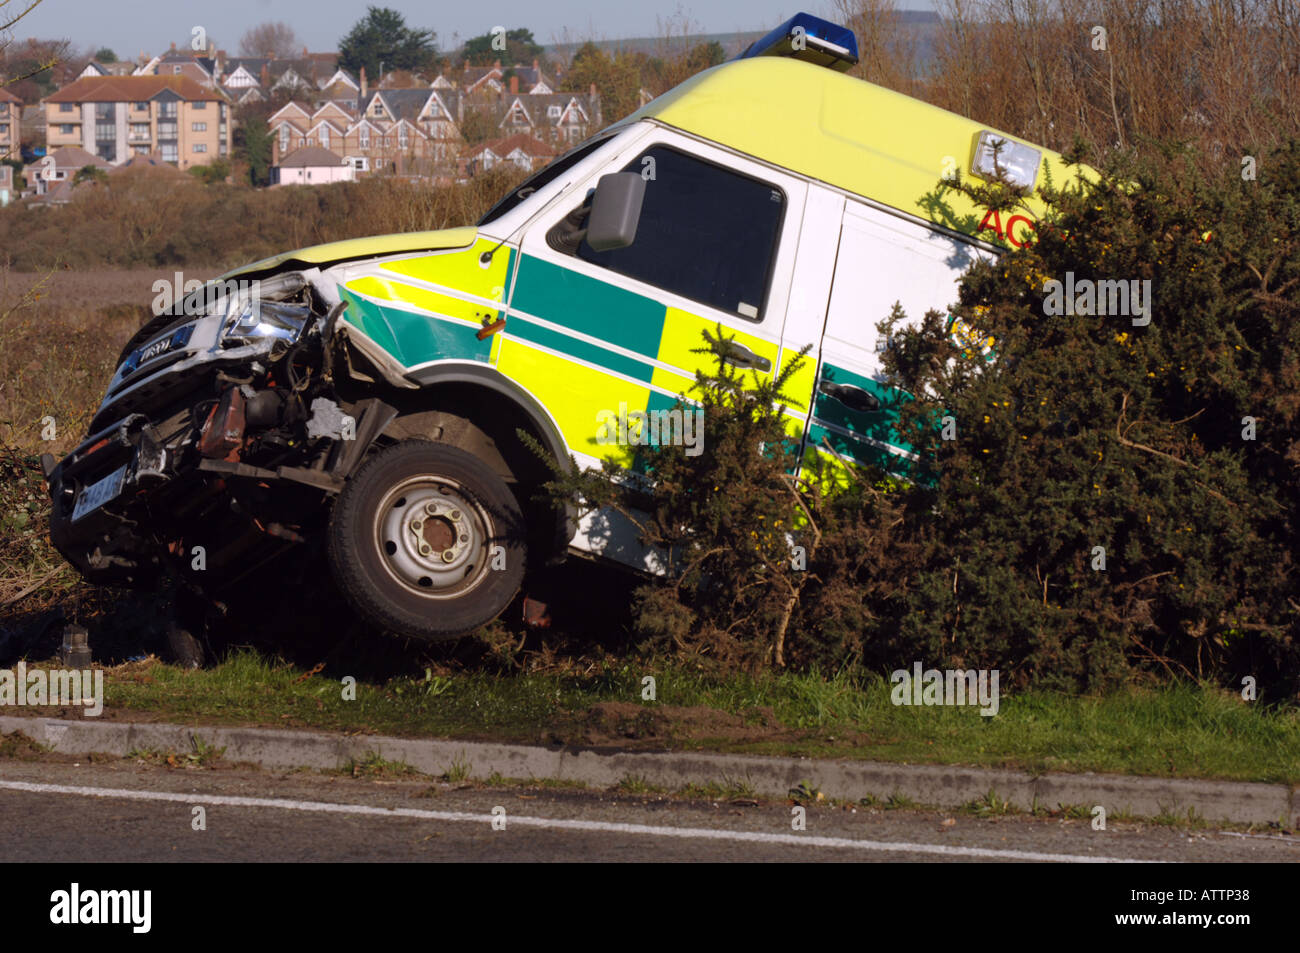 An ambulance that has crashed on the way to an emergency Stock Photo